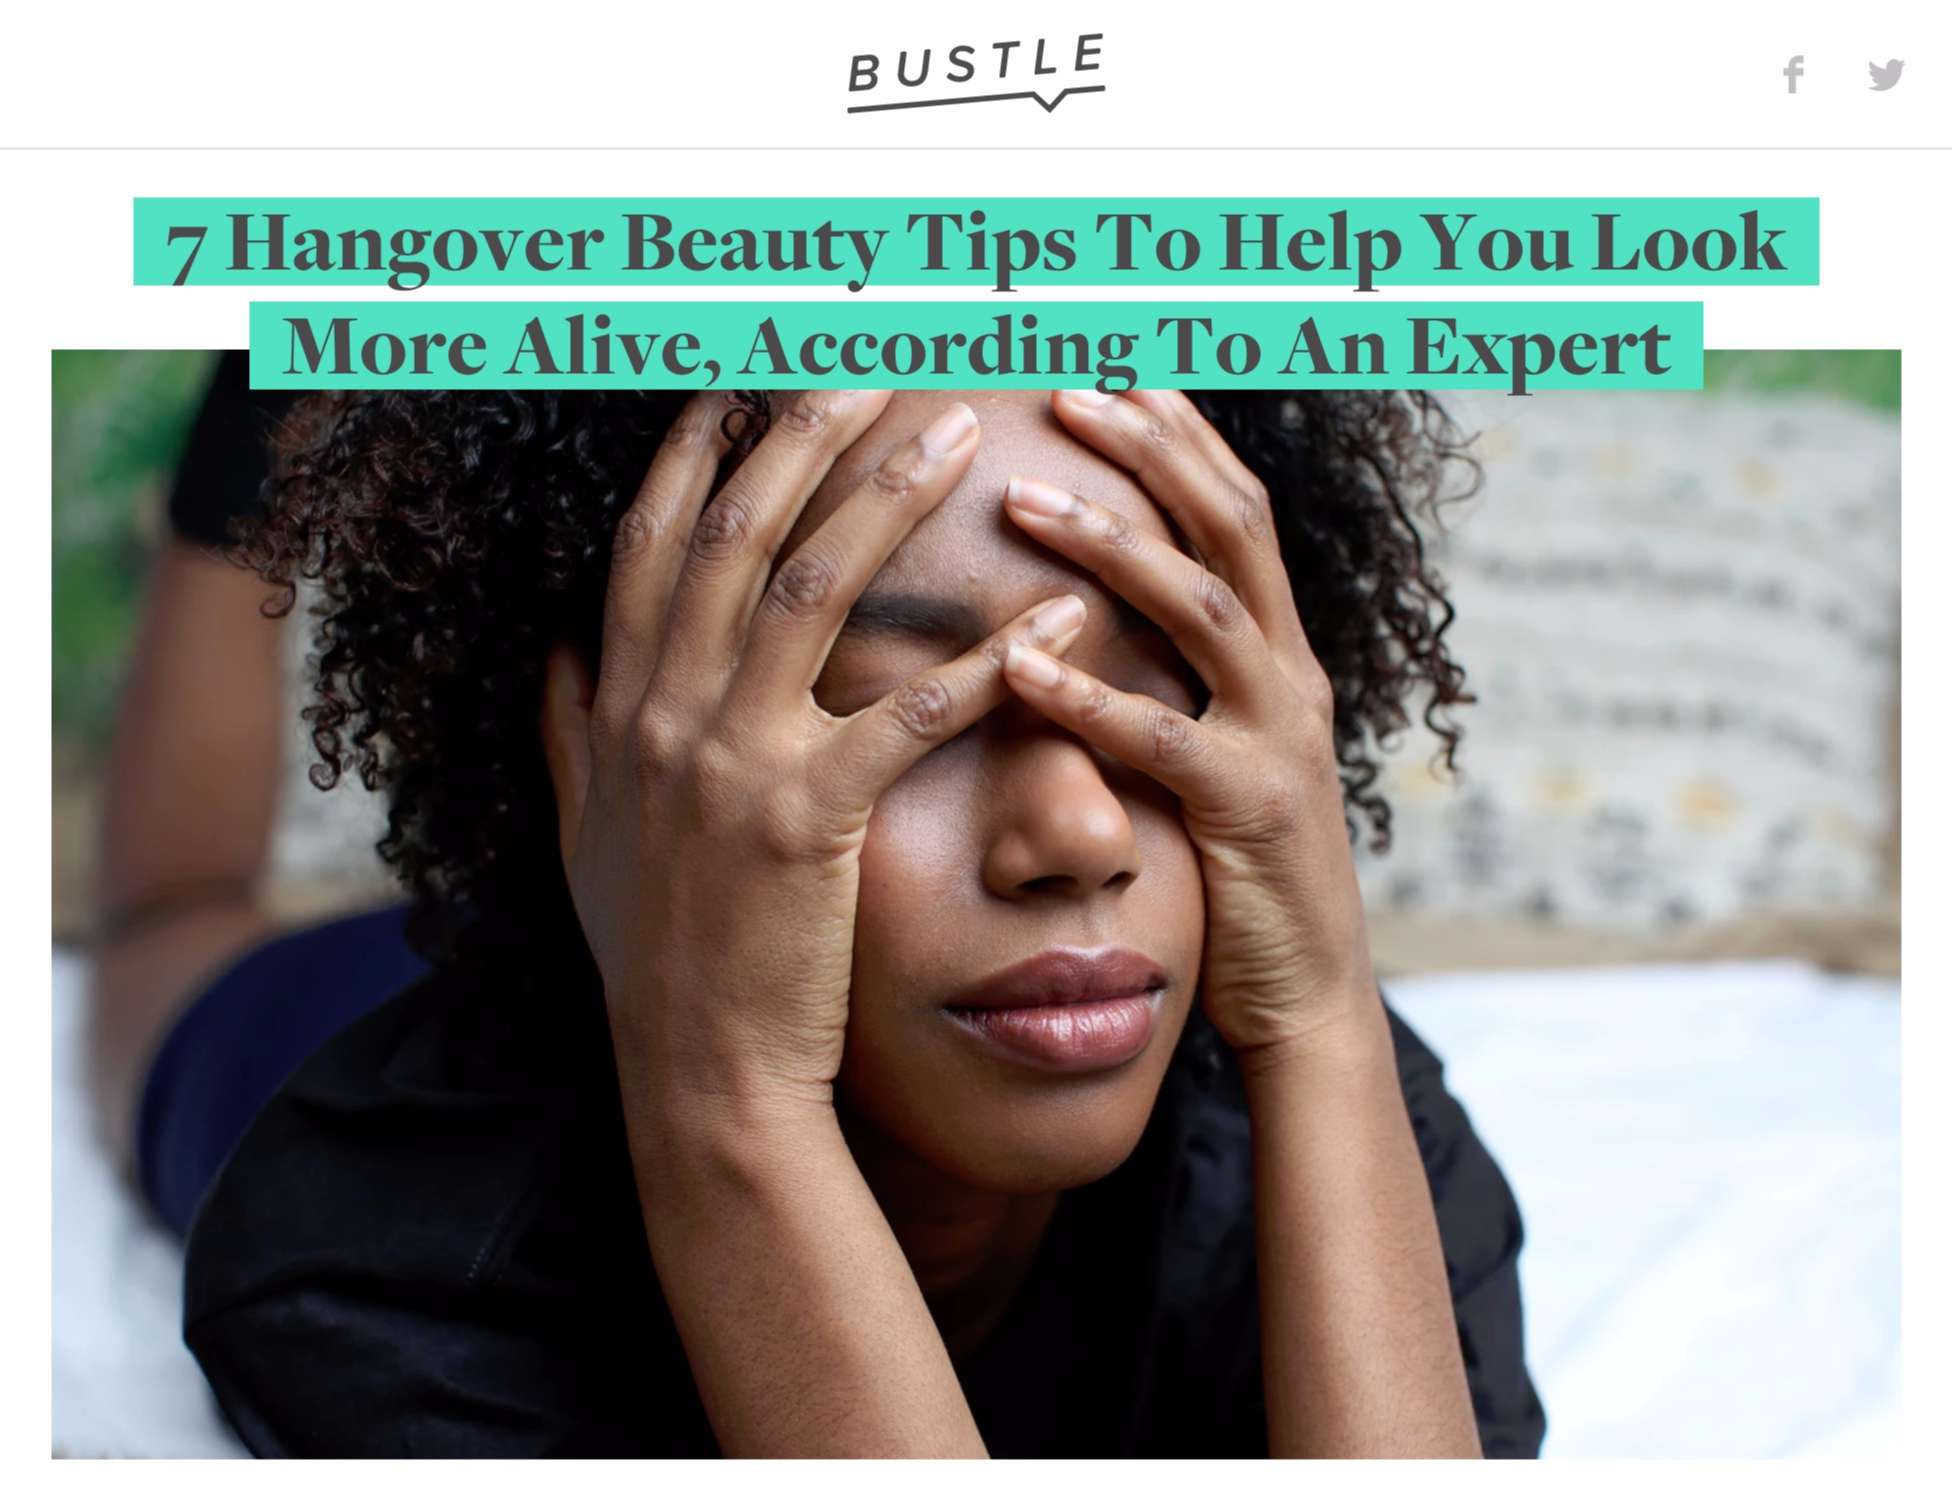 Bustle: Hangover Beauty Tips from Expert Esthetician Gregory Dylan